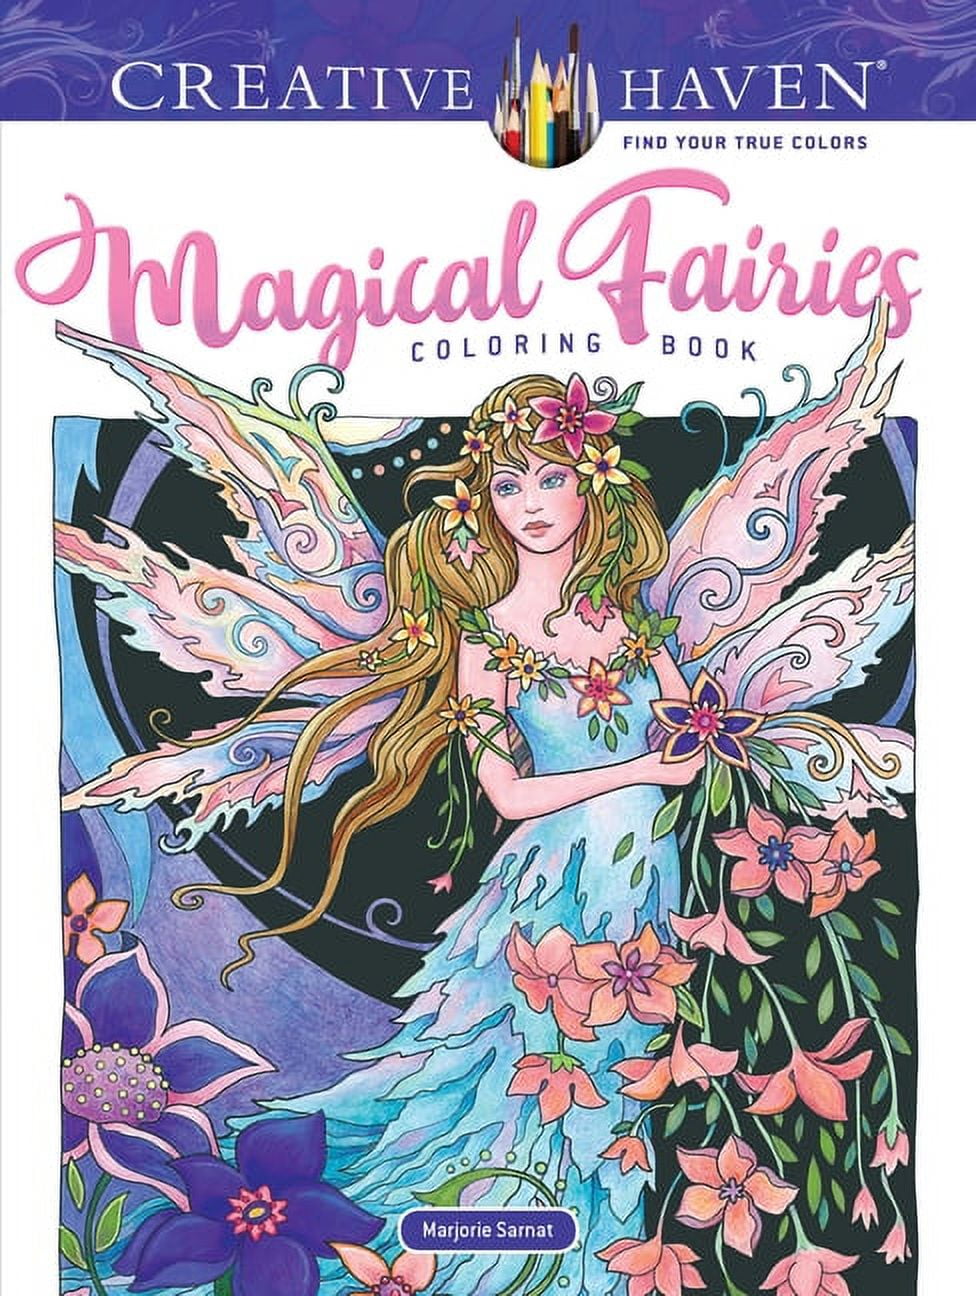 15 Fantastic Coloring Books For Adults - Creative Market Blog